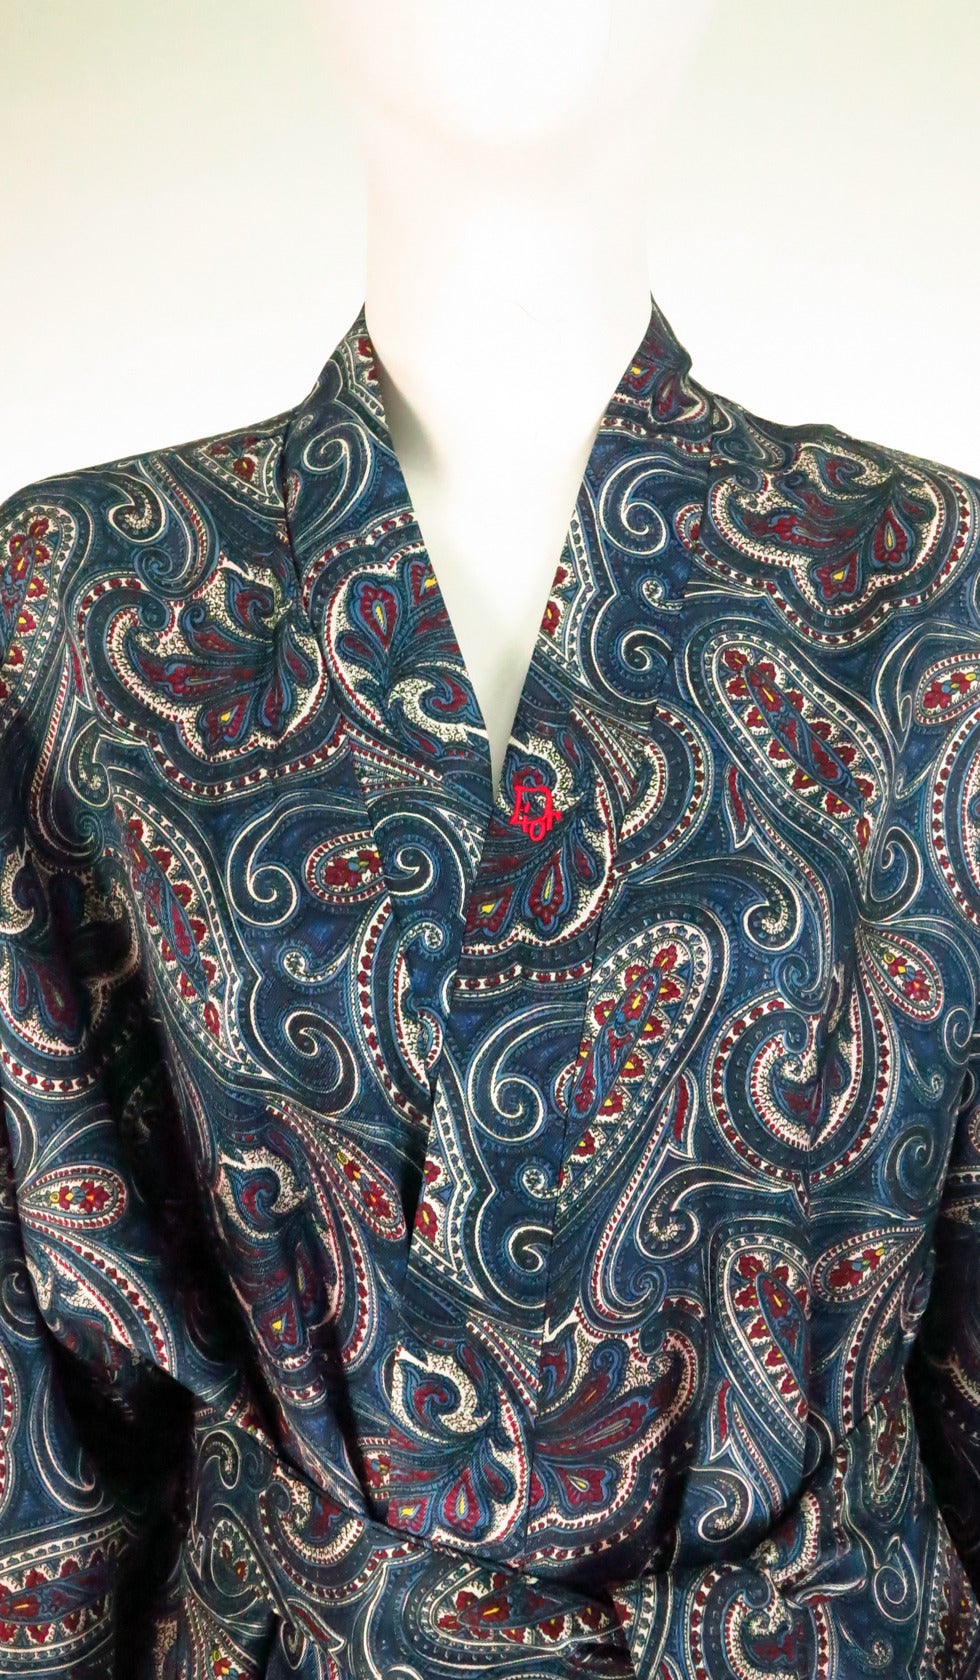 Christian Dior robe de chambre, paisley kimono style robe in shades of blue...Wrap front with tie belt with belt loops...Two hip front patch pockets...Fully lined in red synthetic satin...In excellent condition...Marked one size...Fabric feels like